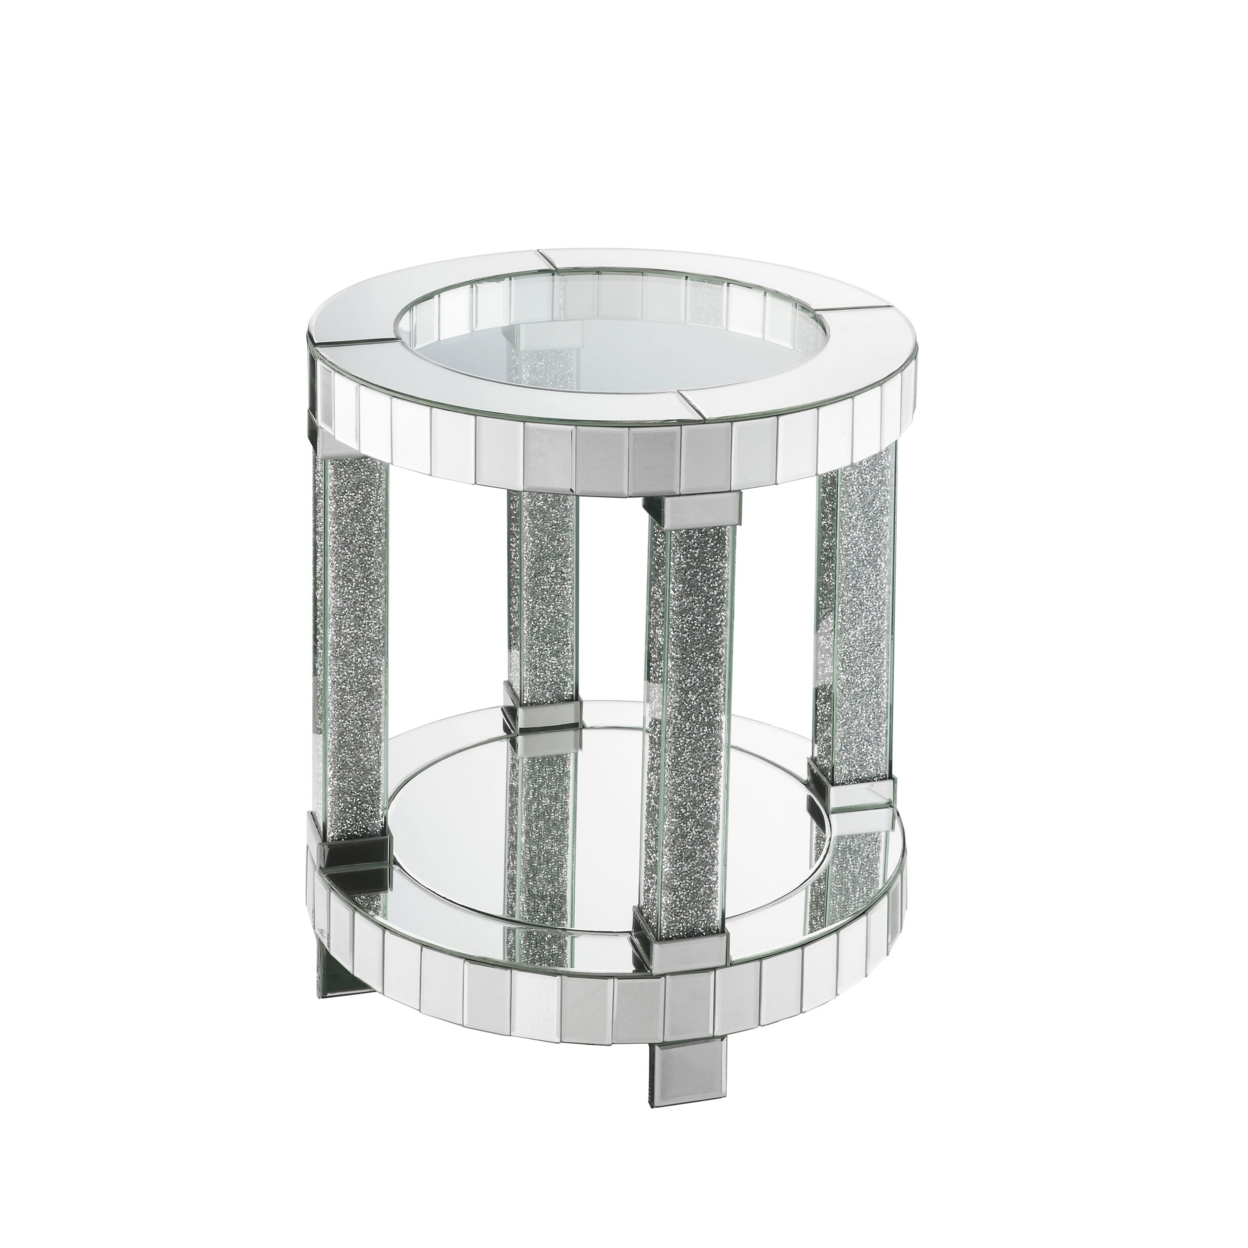 Round Mirrored Frame End Table With Faux Diamond And Bottom Shelf, Silver- Saltoro Sherpi